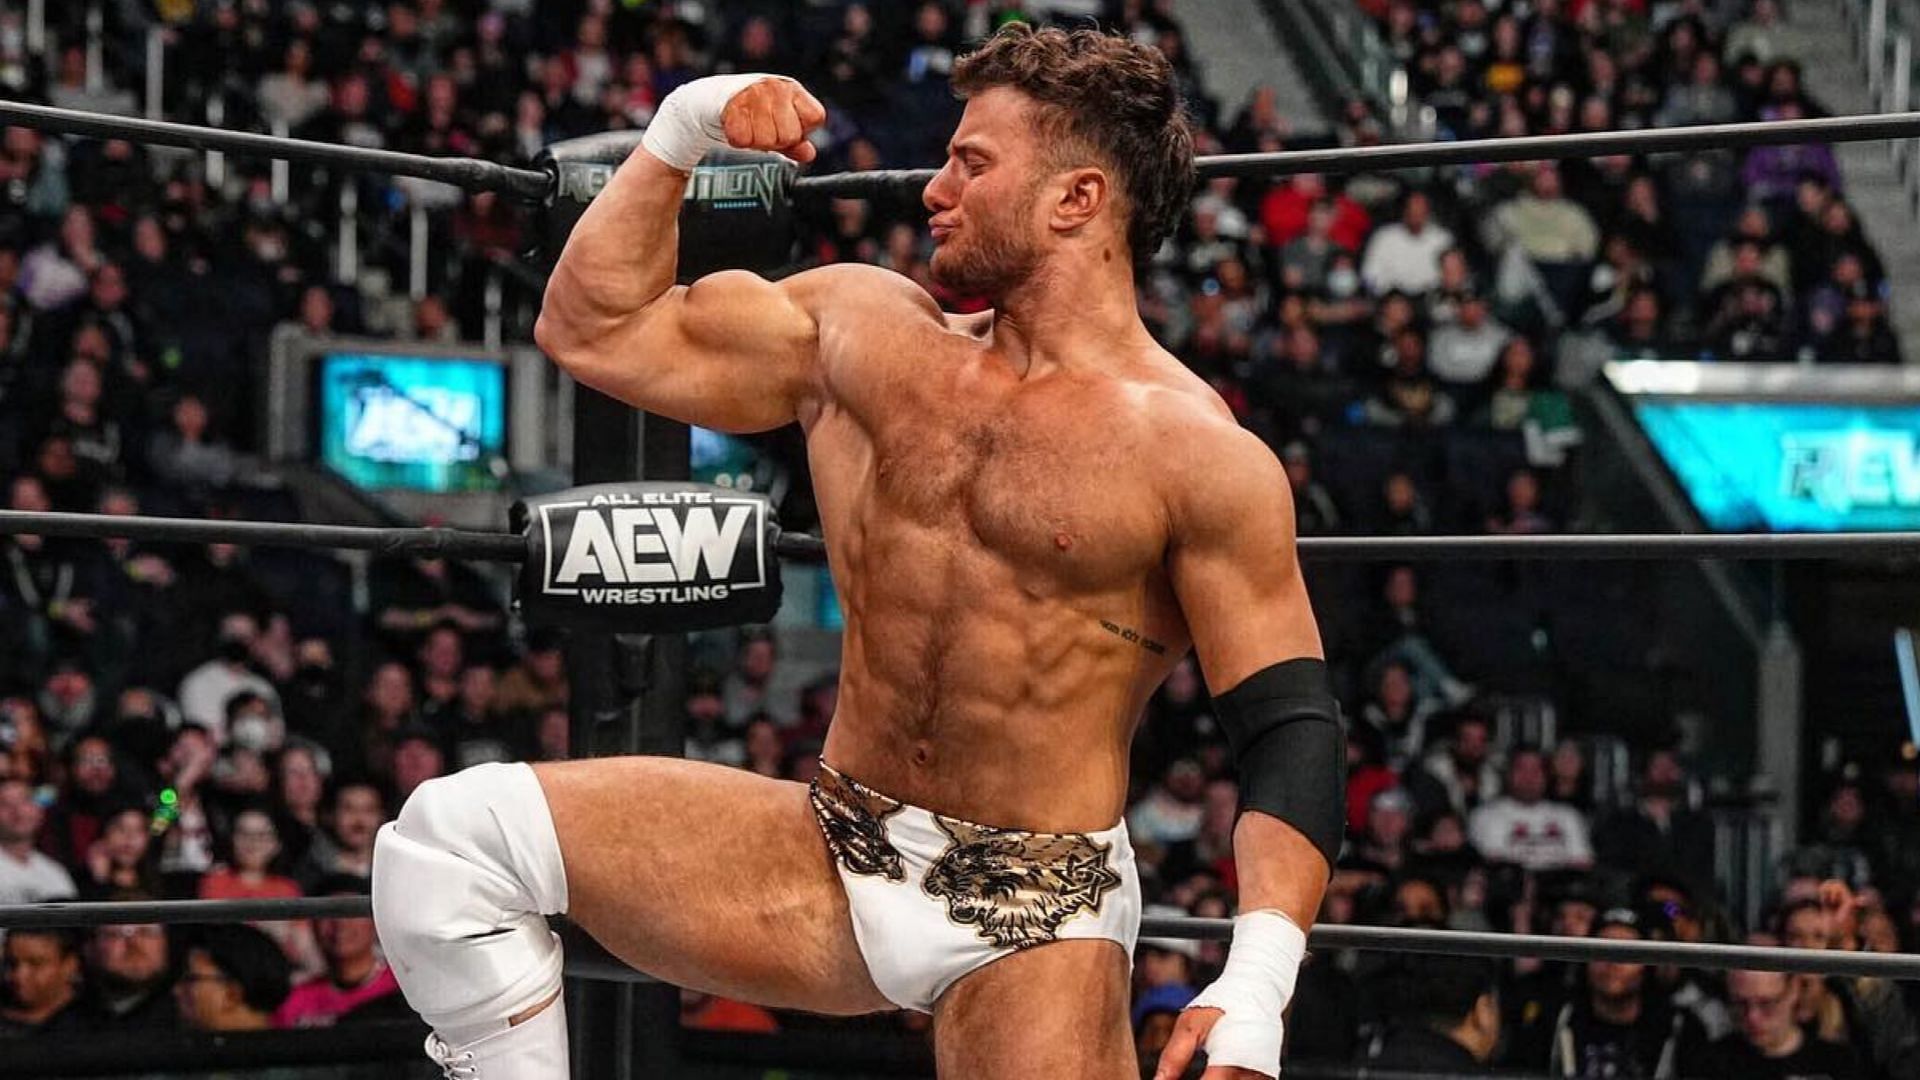 MJF poses in the ring at AEW Revolution 2023